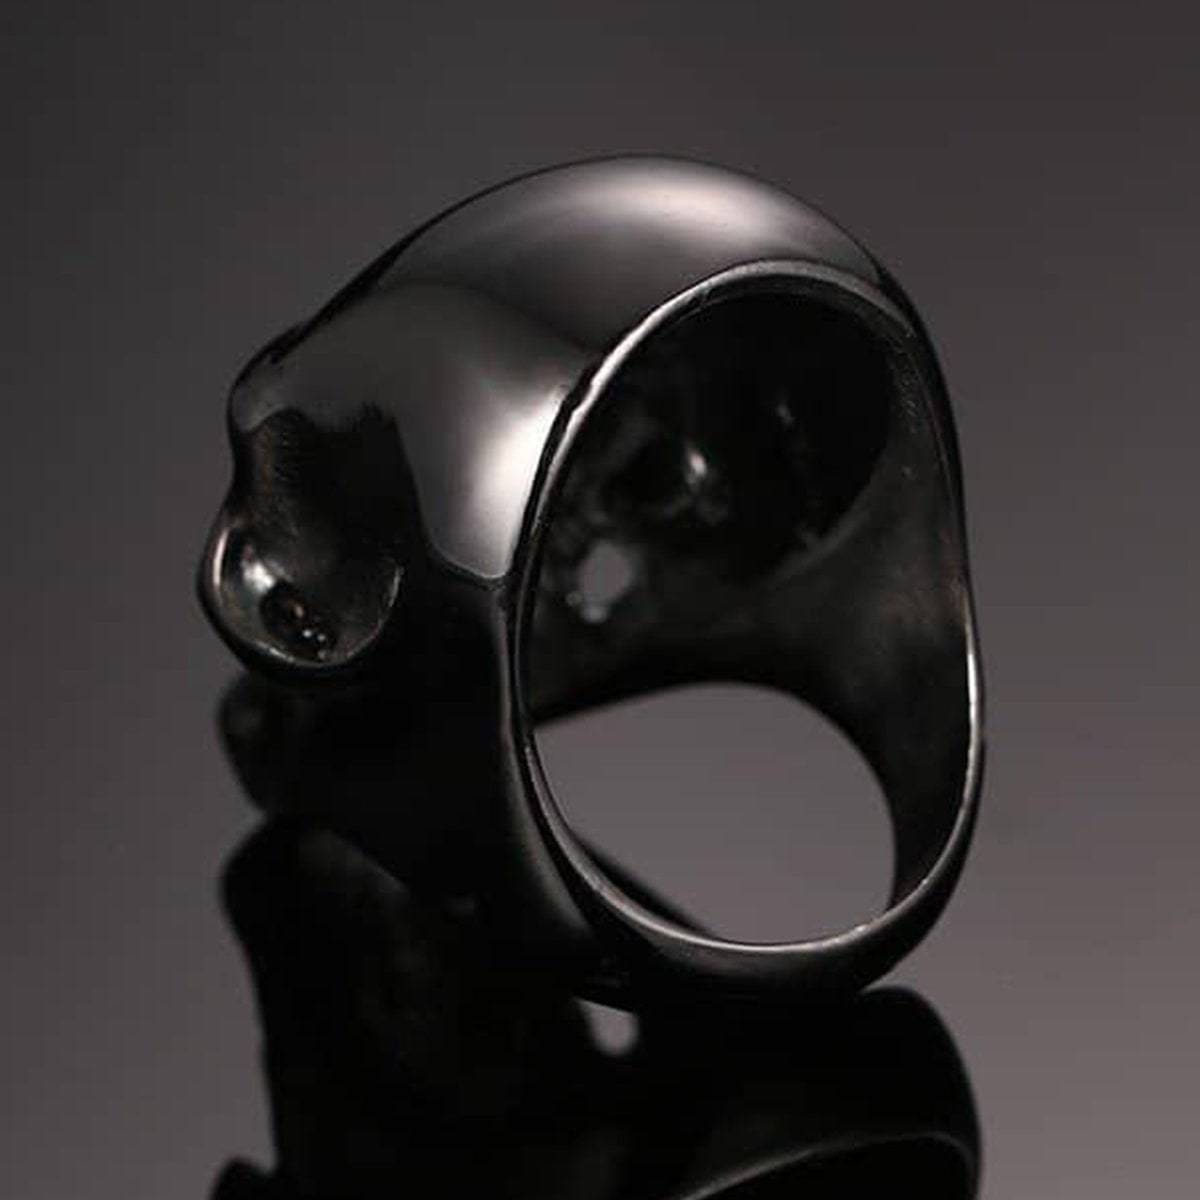 A handcrafted Stainless Steel Premium Skull Biker Ring, Black, personalized for bikers.